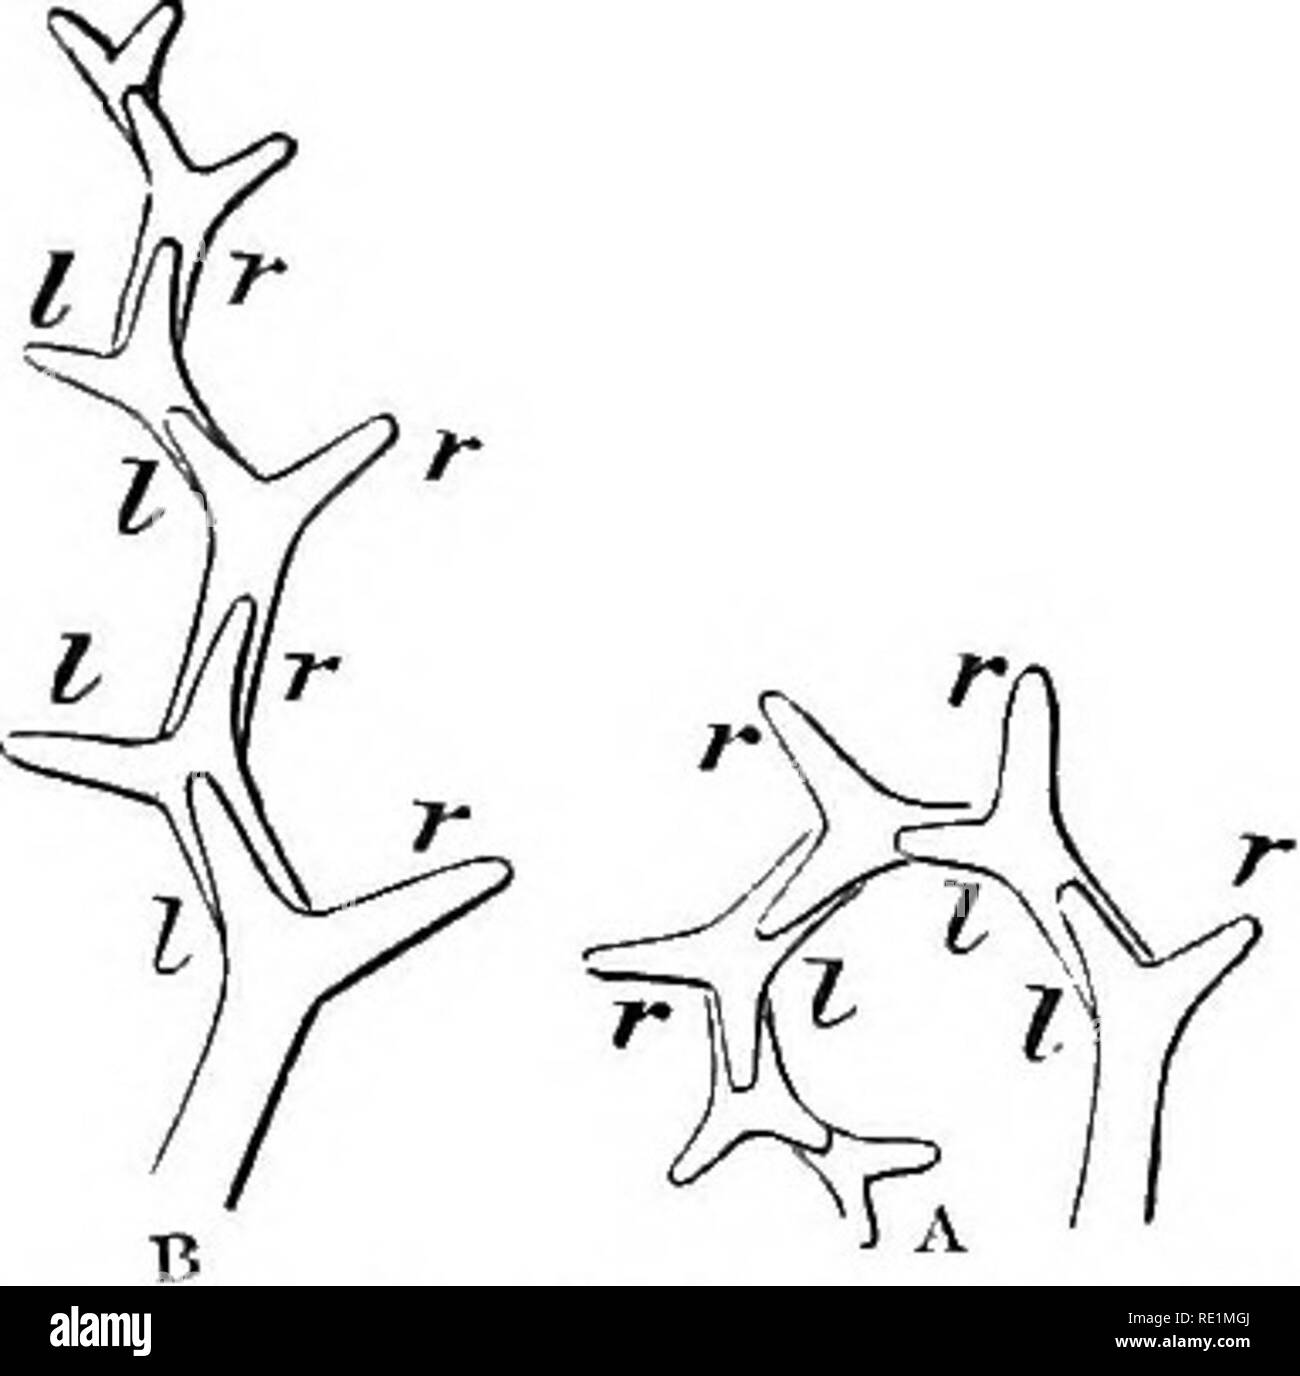 . A manual of botany. Botany. Fig. 42. Diagram of normal or tme dichotomoiis branching, showing the two branches equally developed in a forked manner, and each branch di- viding in succession in a similar way. Fig. 43. Diagrams of sympodial dichotomous branching. A. Helicoid dichotomy. B. Scorpioid dichotomy. In A, the left-hand branches, ?, ?, I. of successive dichotomies are much more developed than the right, r, r, r, r. In B, the left-hand branches, ?, 7, and those of the right hand, ?-, r, are alternately more vigo- rous in their growth. The limbs of the dichotomy which become the success Stock Photo